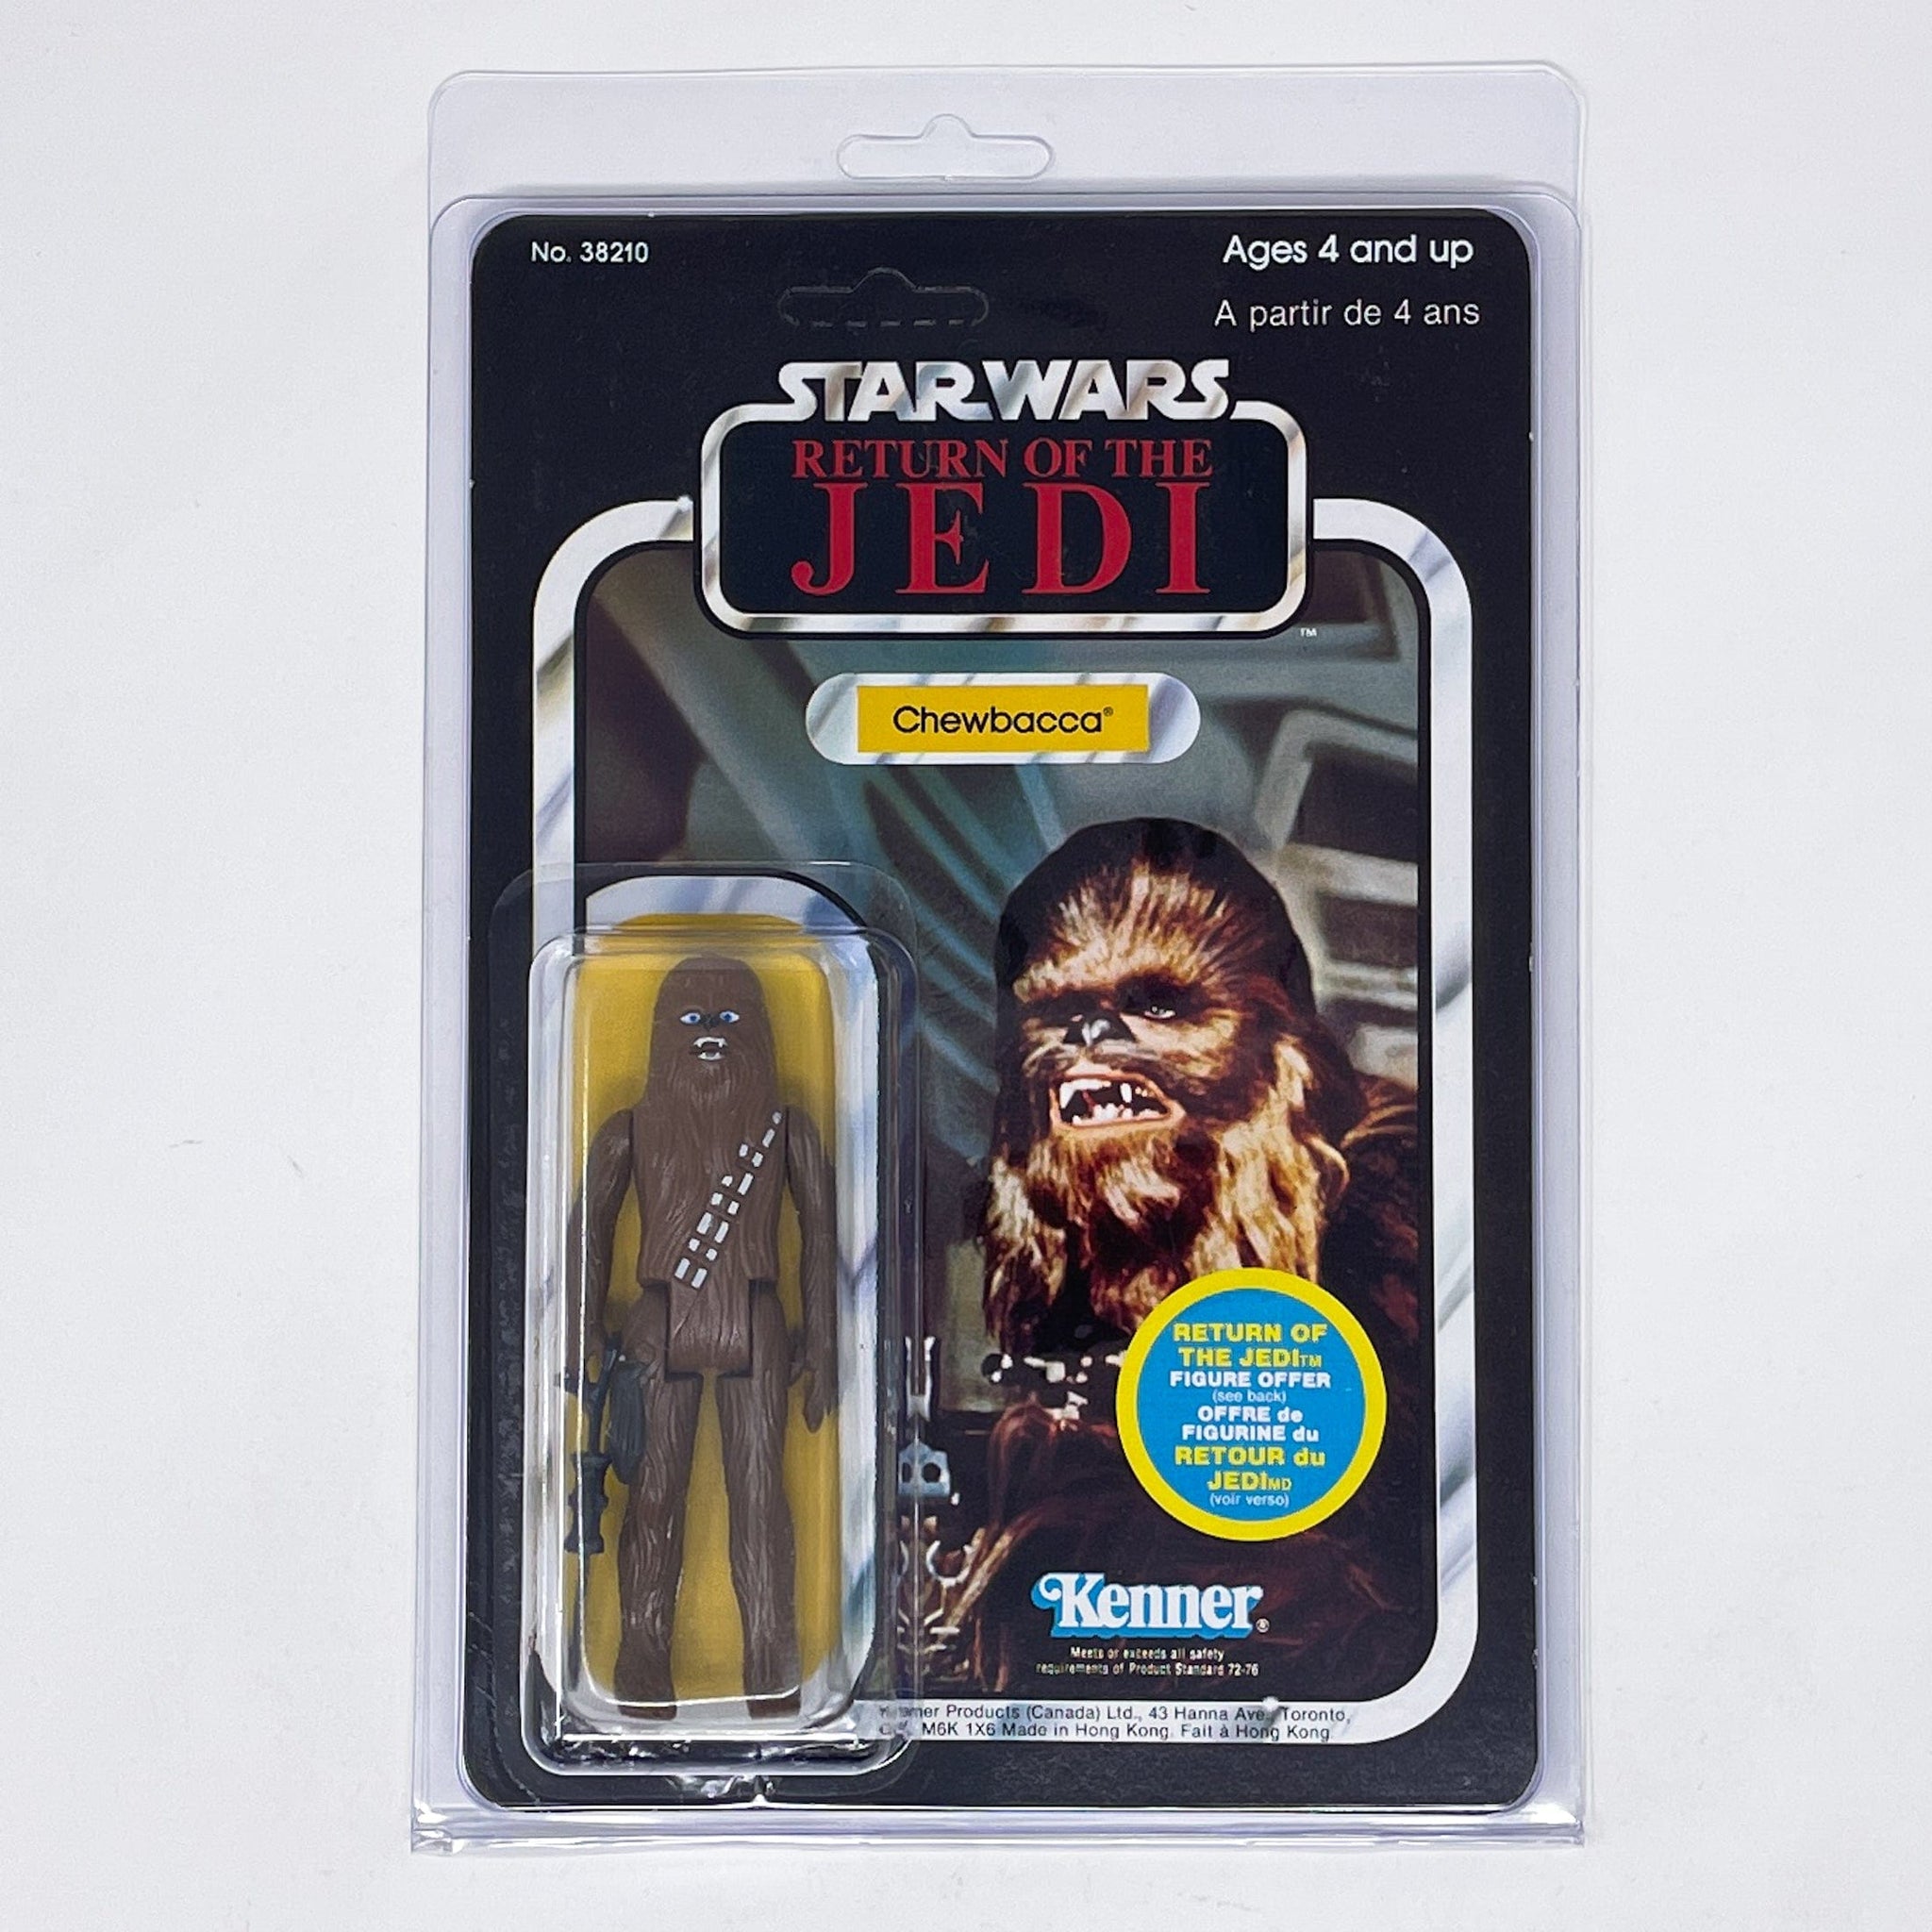 Bubble Clamshell Cases for Loose Figure & Cardback Star Wars